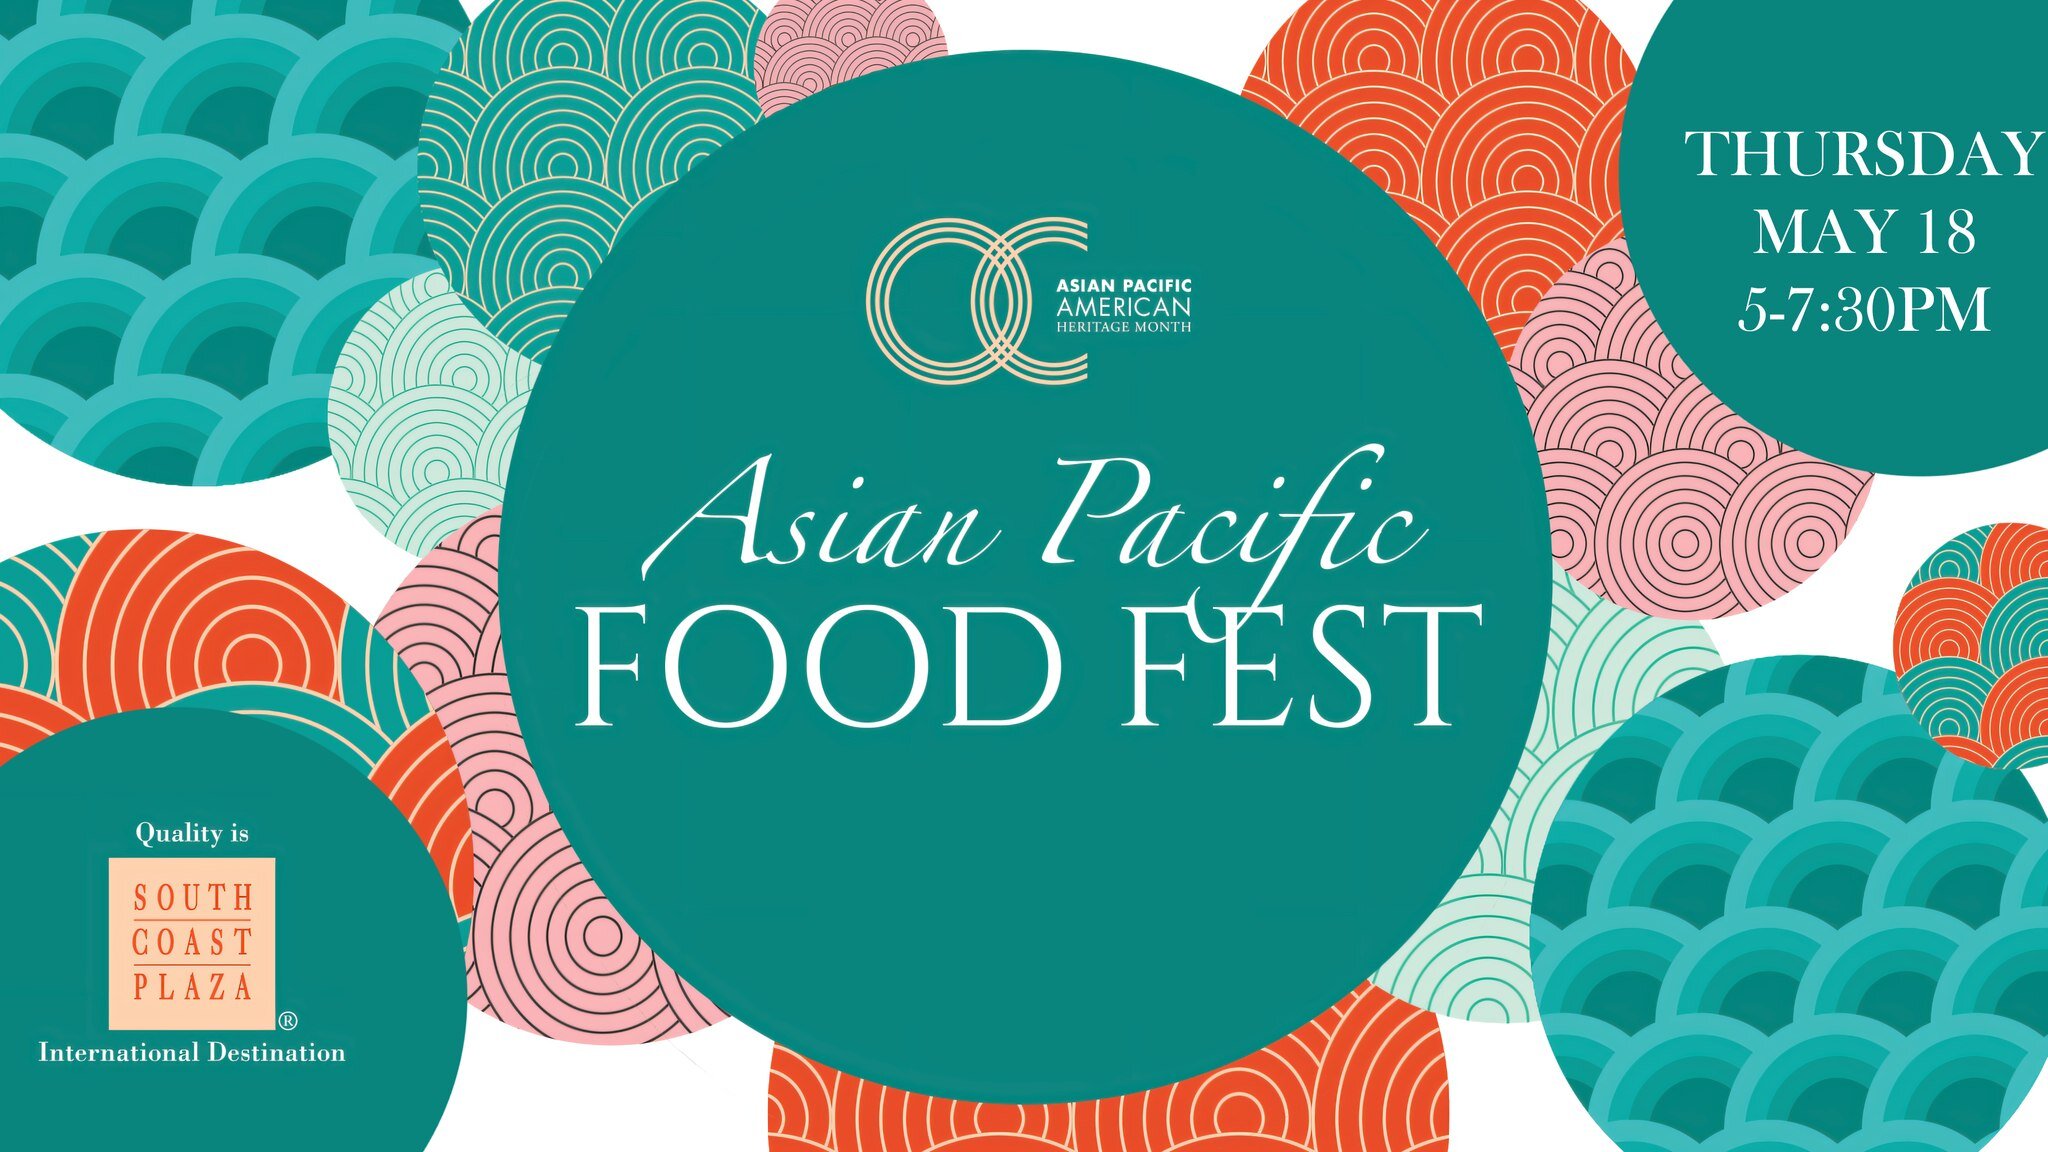 @southcoastplaza once again is partnering with Asian Pacific Community Fund in celebrating Asian Pacific American Heritage Month (APAHM) with their event, Asian Pacific Food Fest

The Asian Pacific Food Fest features twelve unique food stations highl